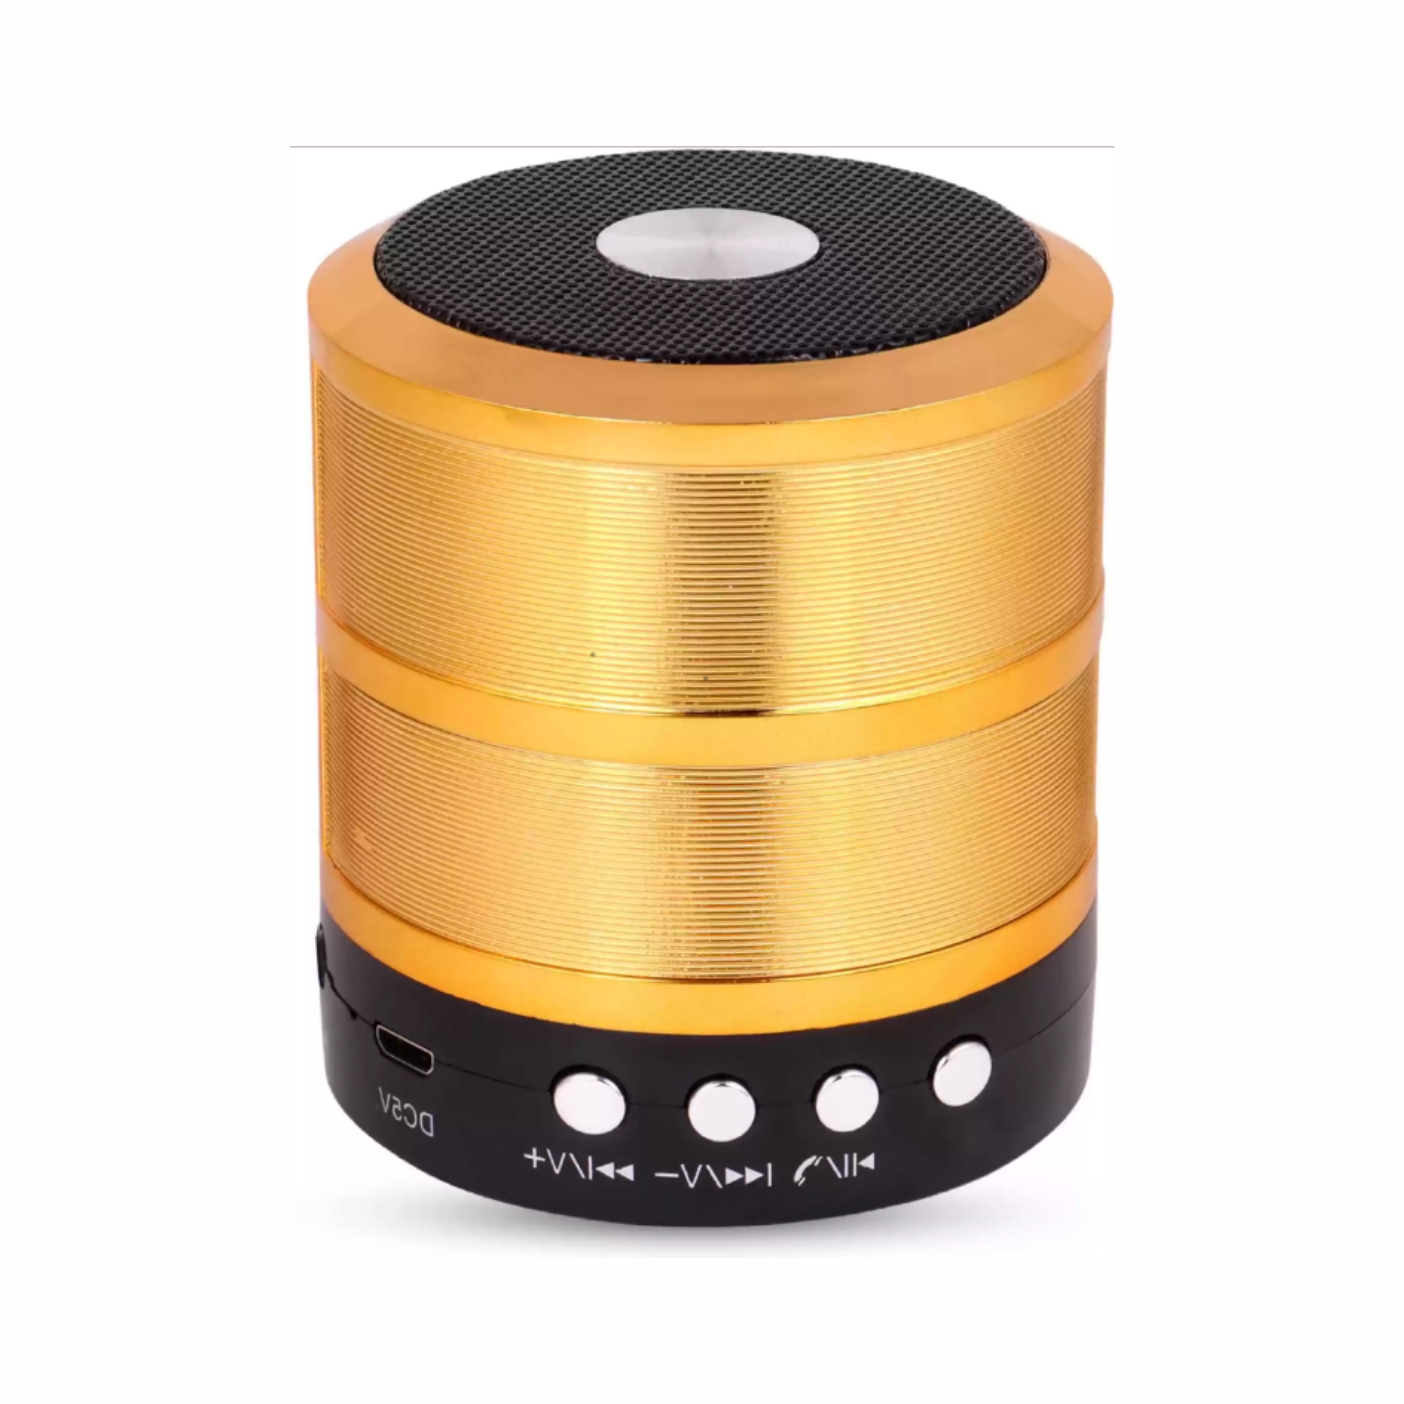 Traveling Speaker, Built Bluetooth , WS-887 Speaker ,Fell The Premium Loud So Popularity ,Mini Speaker,FM/ Supper Extra Laud Speaker , Sound Speaker ,3D Sound Speaker,Mini Portable ,Mega bass Speaker, All Type Music,/Wireless Metal Body Speaker |AUX |USB |TF |FM in Connectivity, Calling Supported For {Mobile/Tablet/PC/Laptop} Flip Laptop /Tablet/PC/ ,Connectivity Lighting Speaker with Compatible for All Device/Random Bluetooth Desktop Speaker LED Bluetooth speakers 10 W Bluetooth Speaker  (Gold, Stereo Channel)